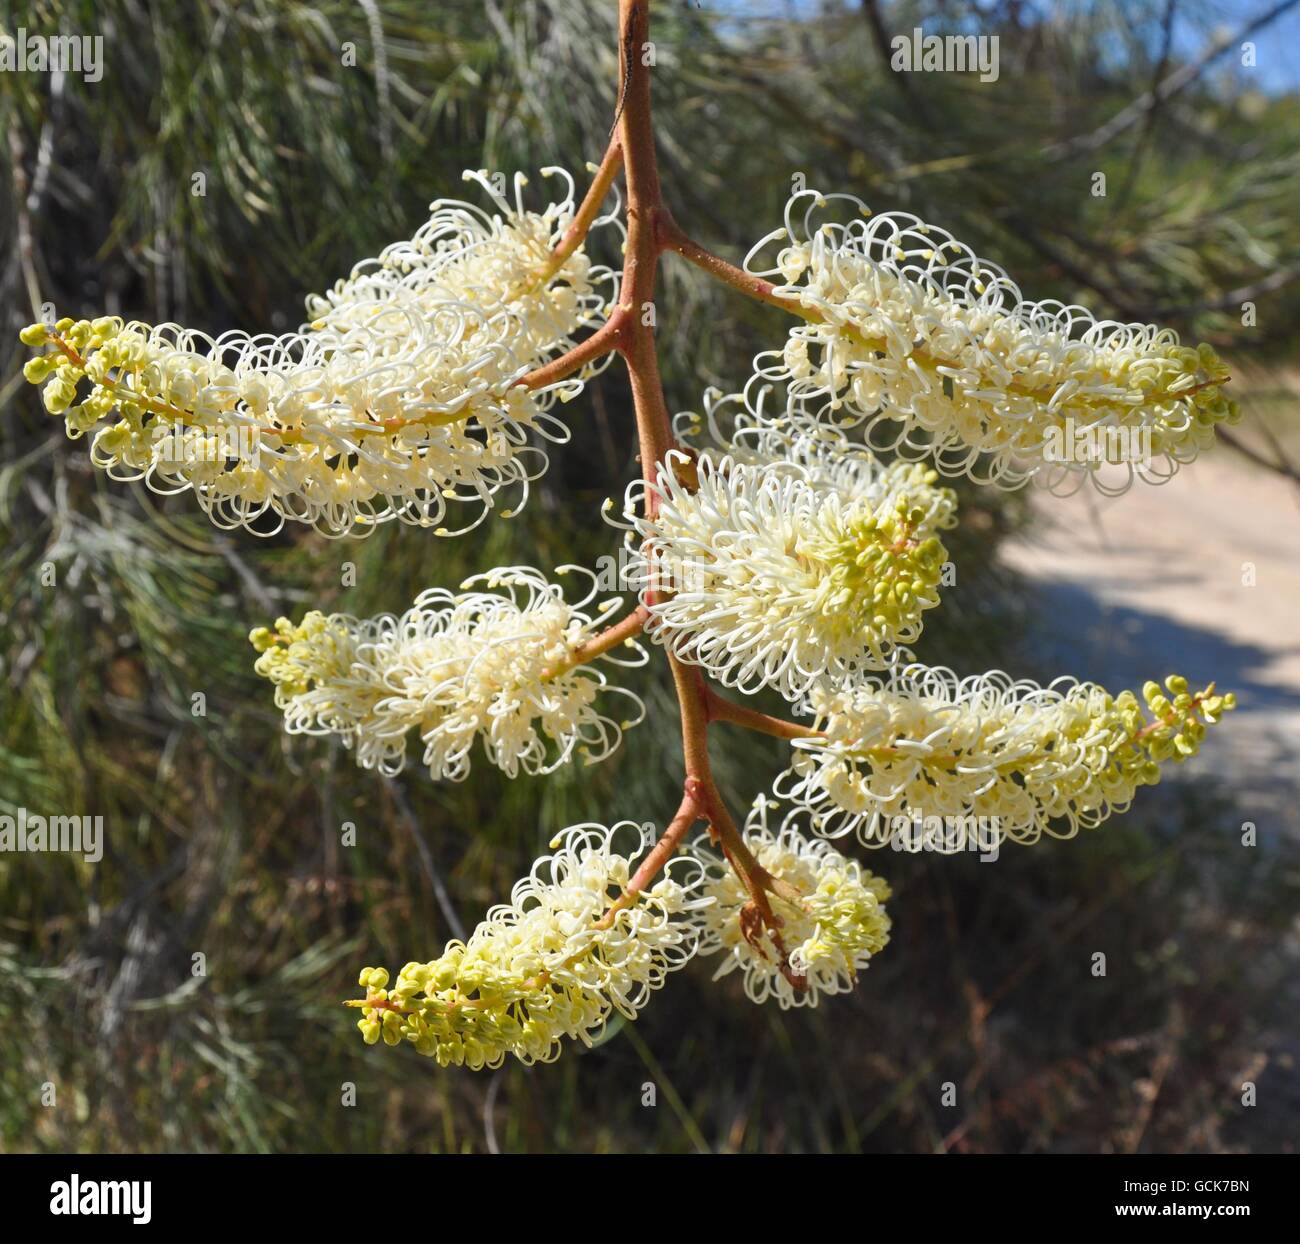 Creamy yellow and white wiry spider flower, Grevillia Moonlight, in outdoor nature setting in Western Australia. Stock Photo